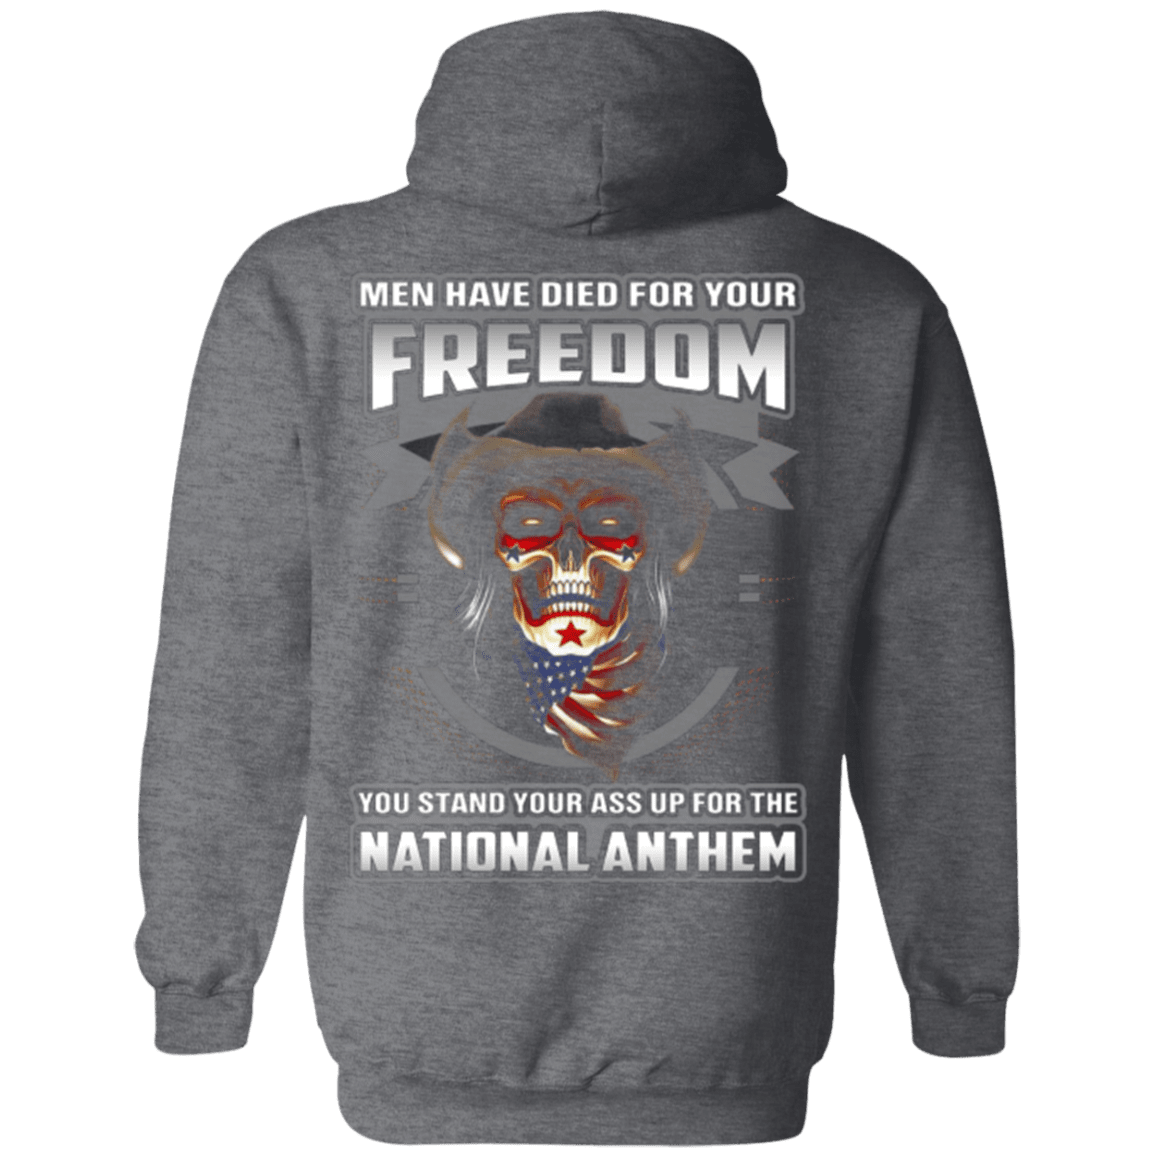 Military T-Shirt "Men Have Died For Your Freedom Stand Up For The National Anthem"-TShirt-General-Veterans Nation